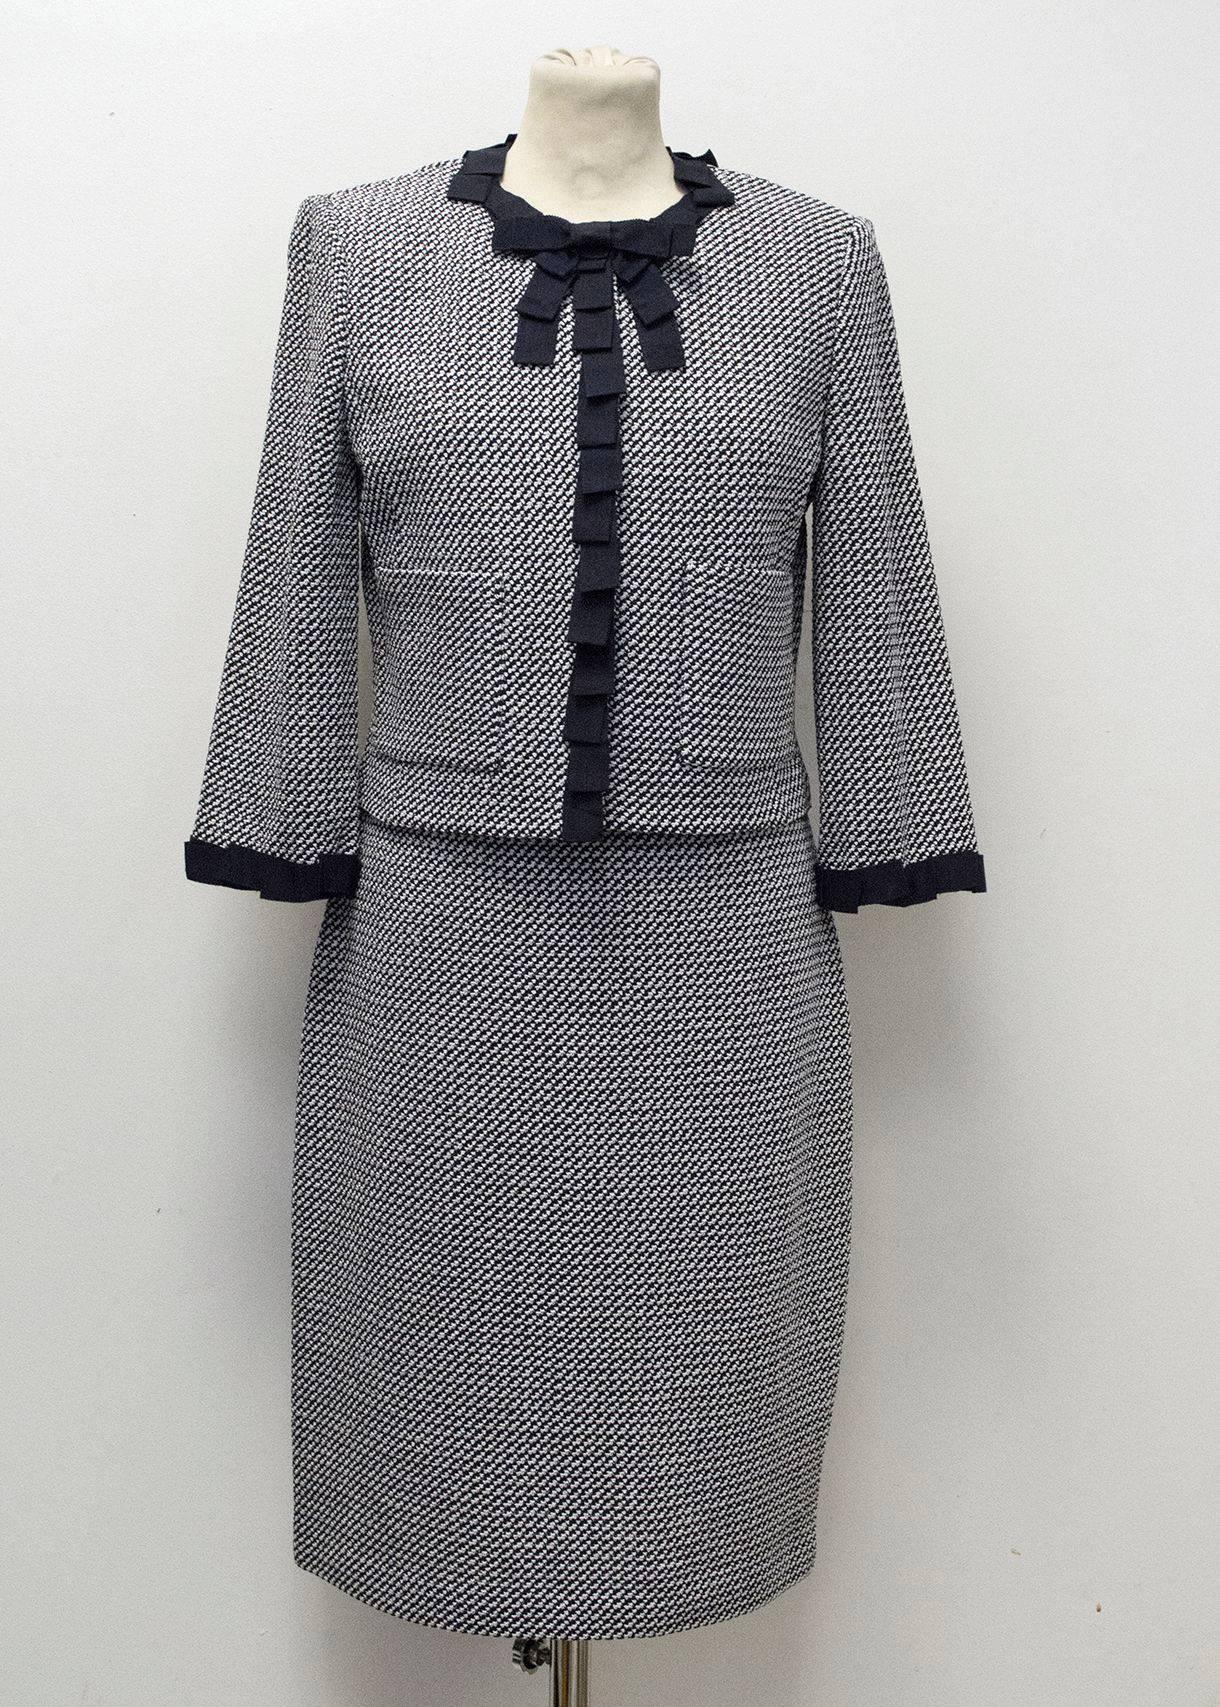 St. John dress and jacket in a navy and white houndstooth pattern. The dress is sleeveless and fitted with square-v neckline, navy ribbon detail on the vest and concealed zip closure at the back. The jacket is unlined with a relaxed fit and is